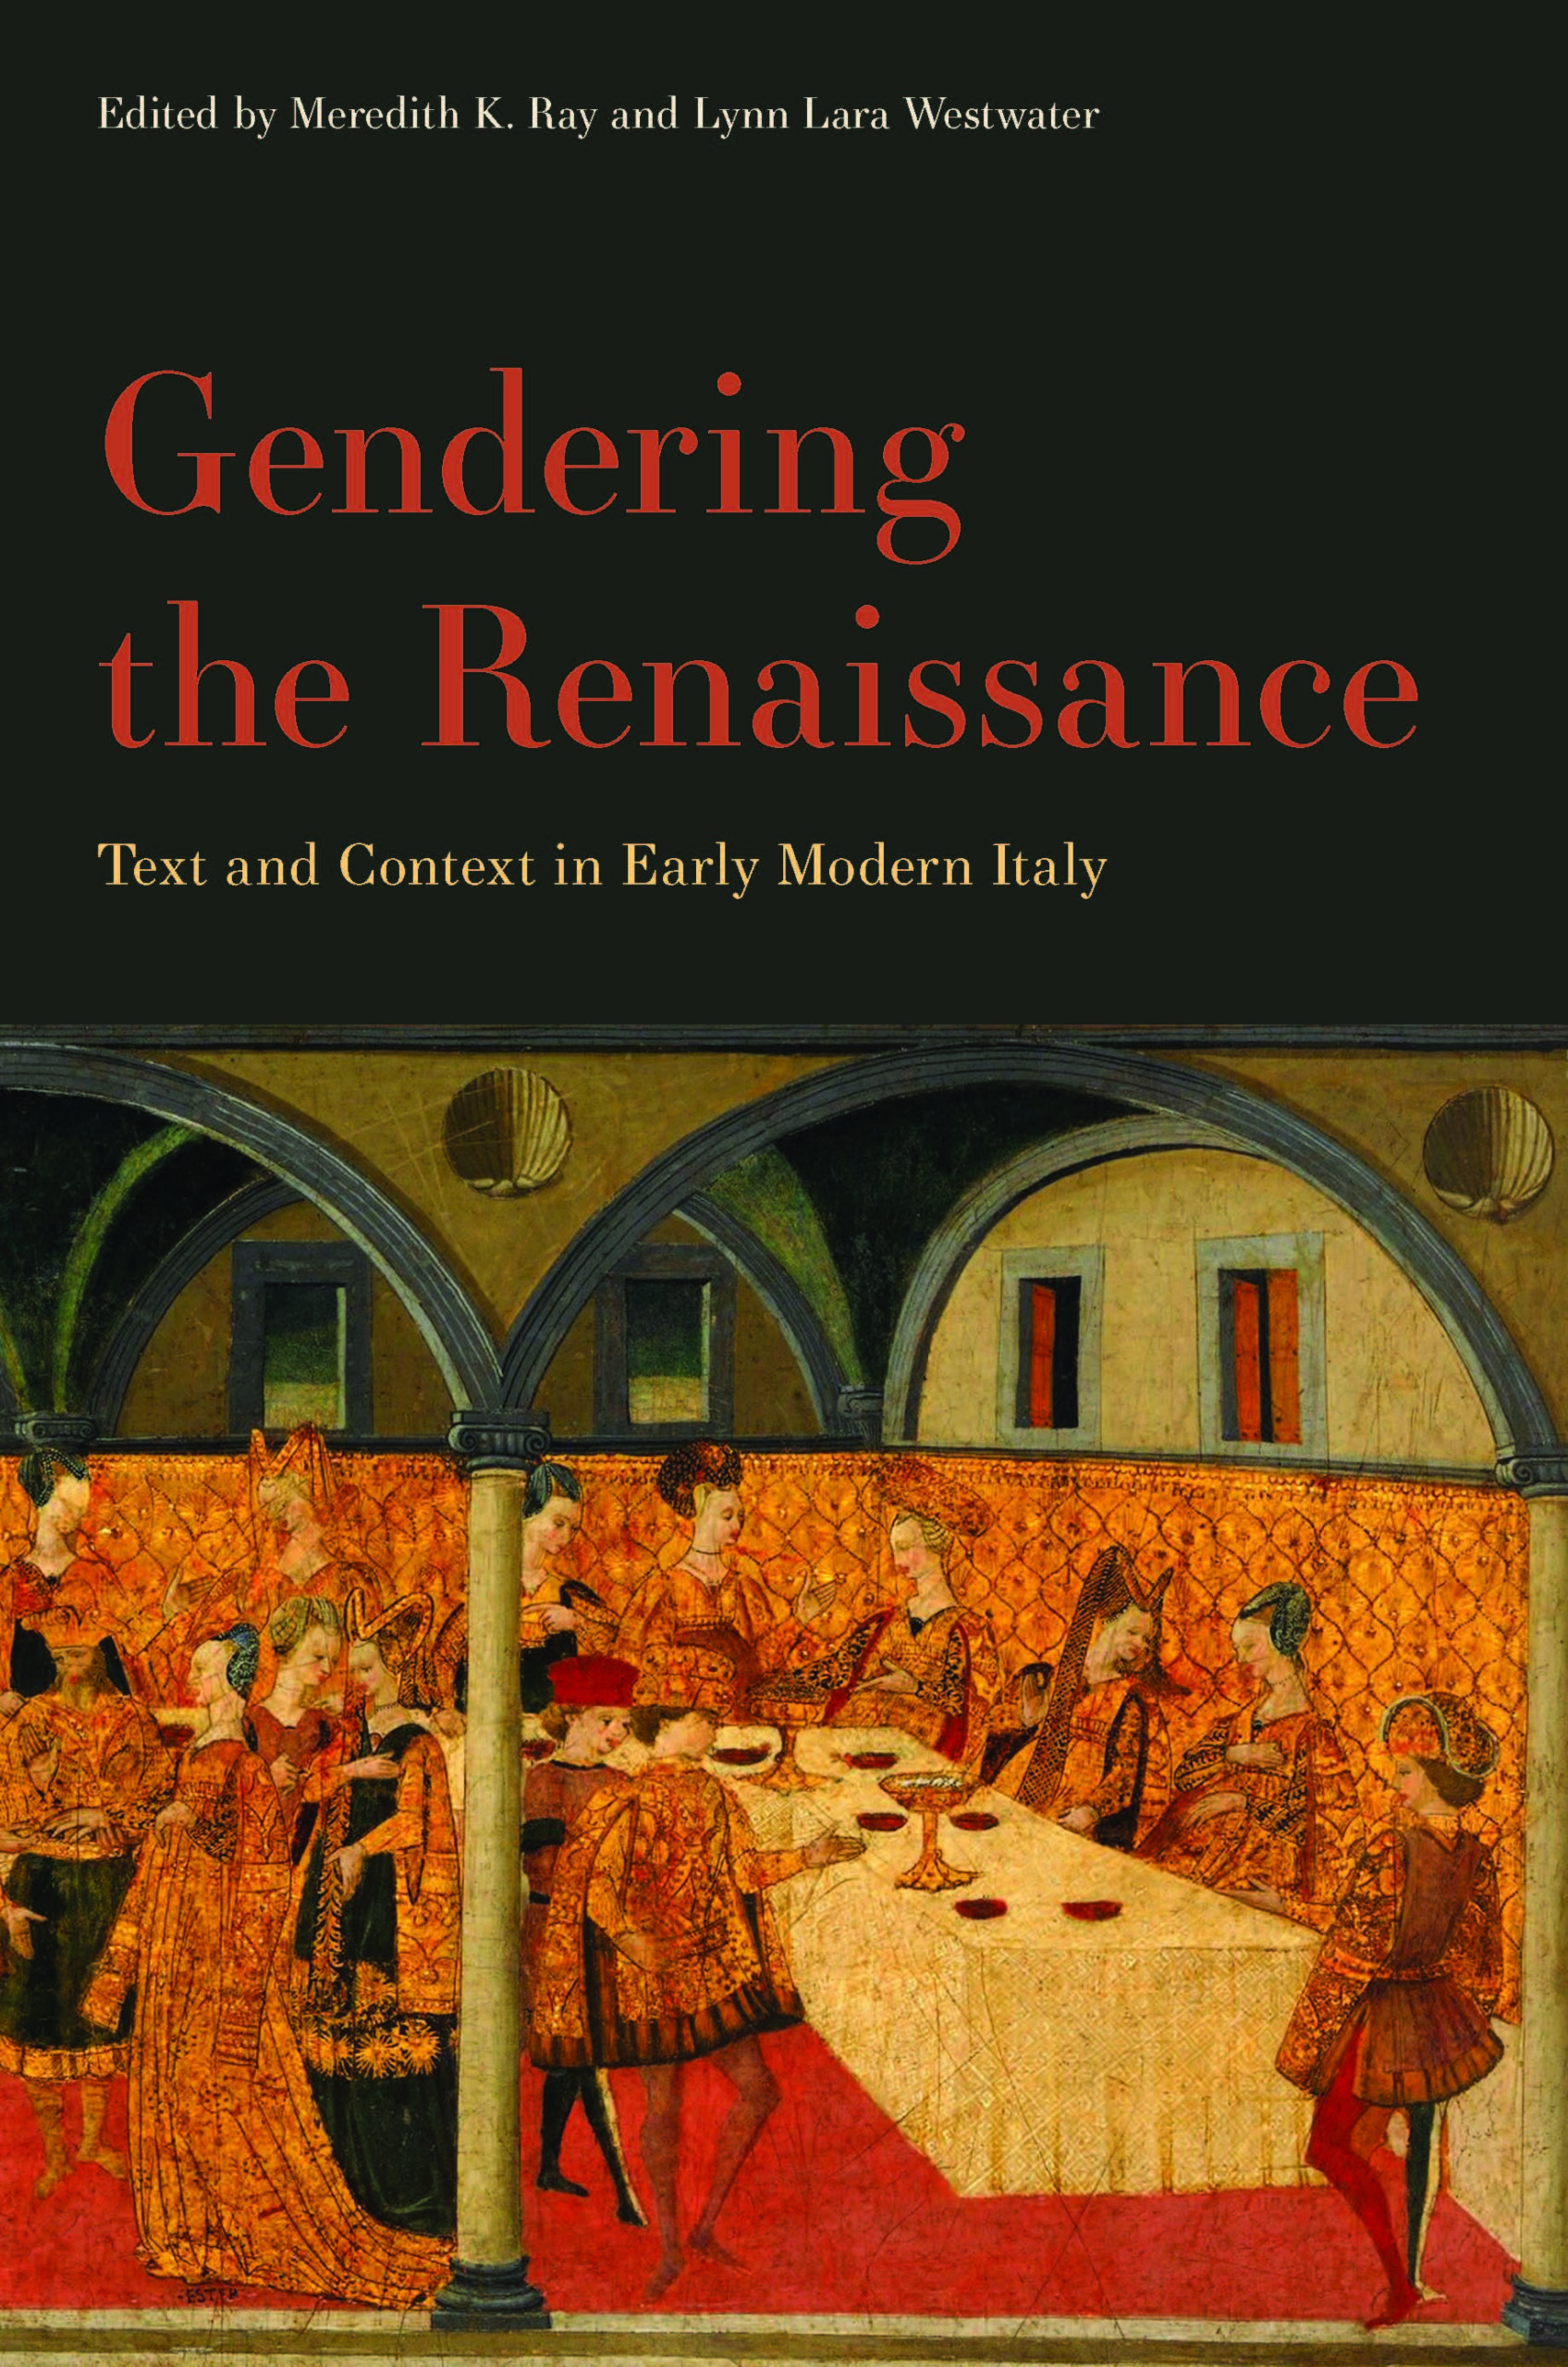 Forthcoming in The Early Modern Exchange Series